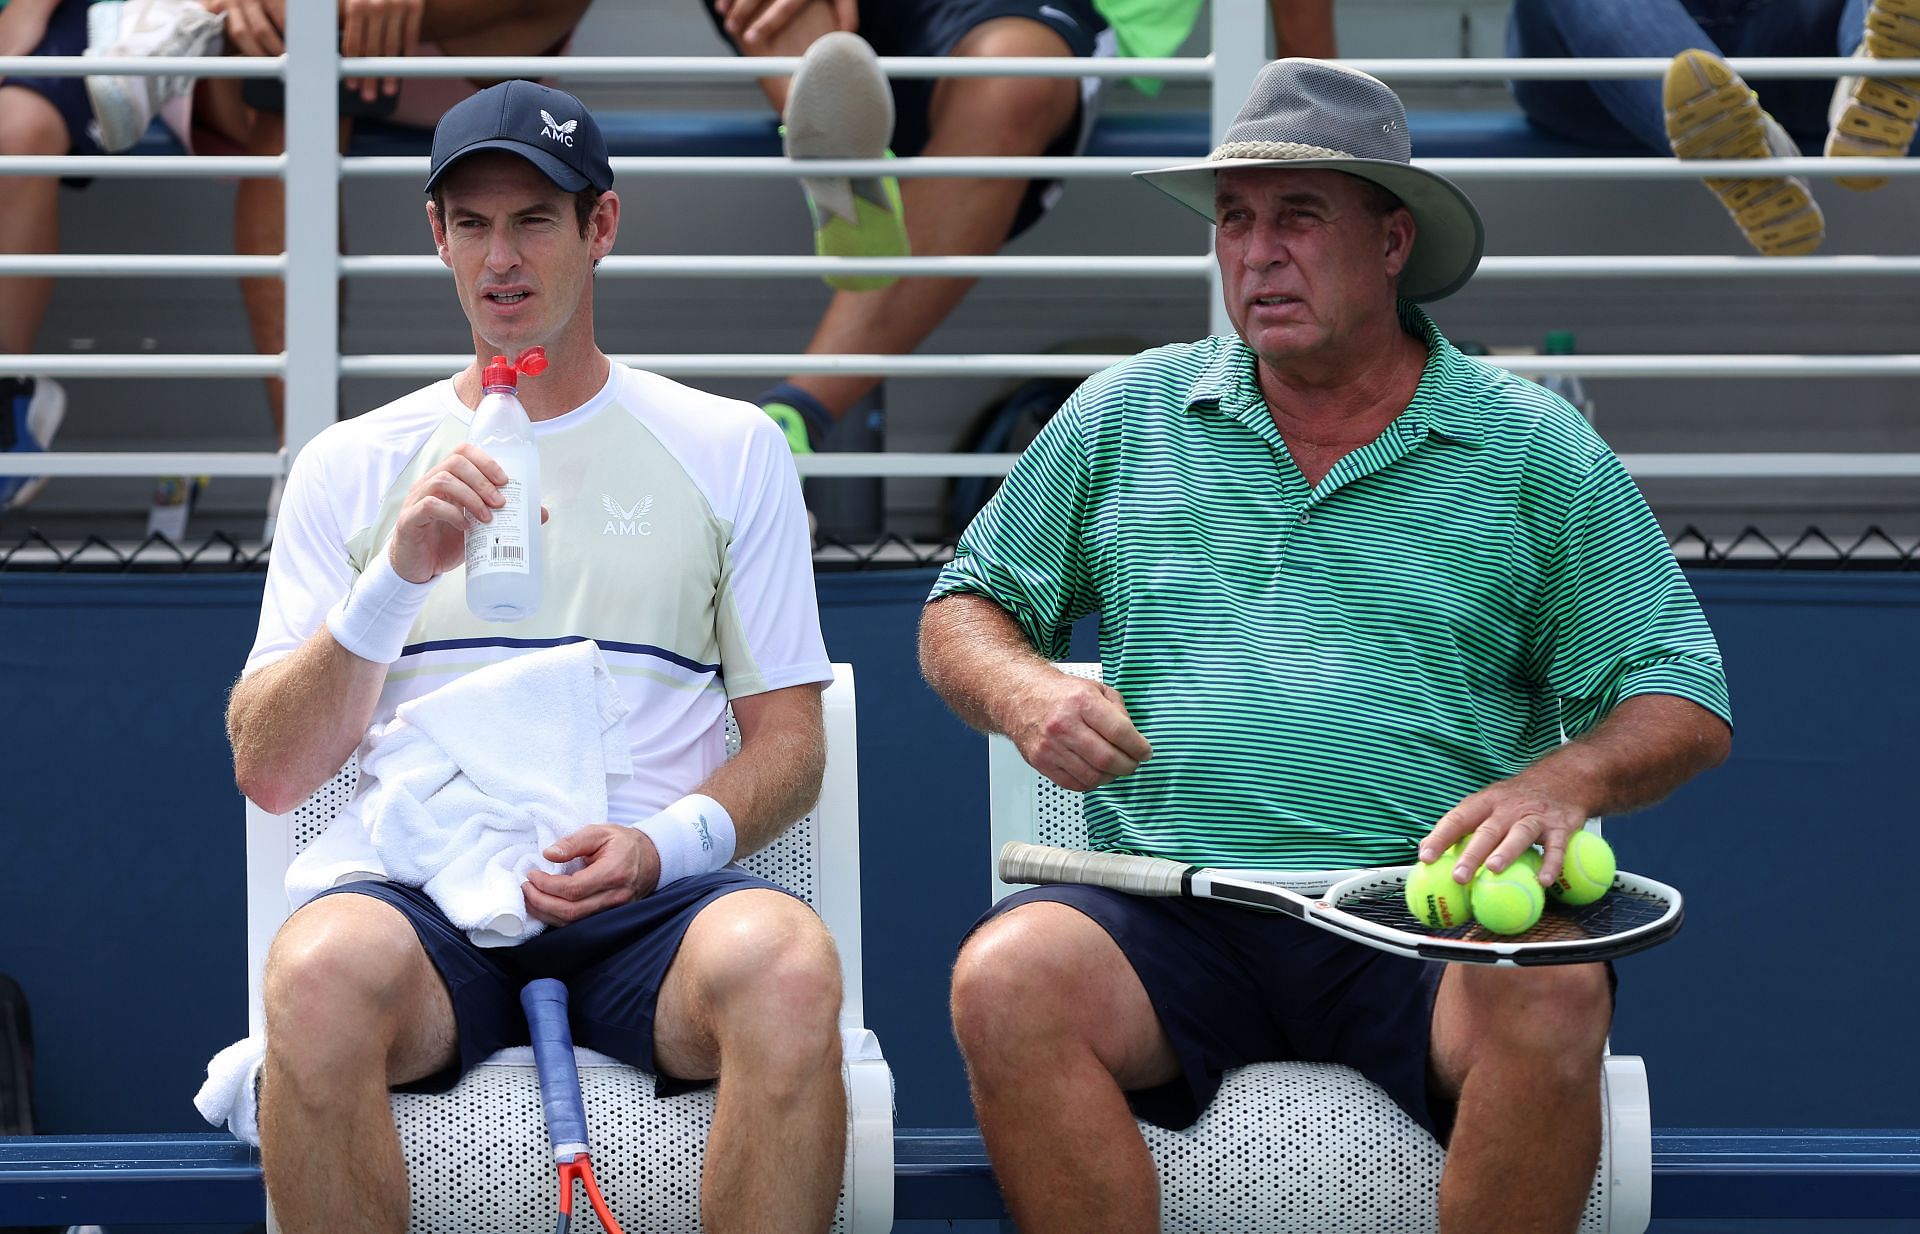 Ivan Lendl (right) is currently the coach of Andy Murray